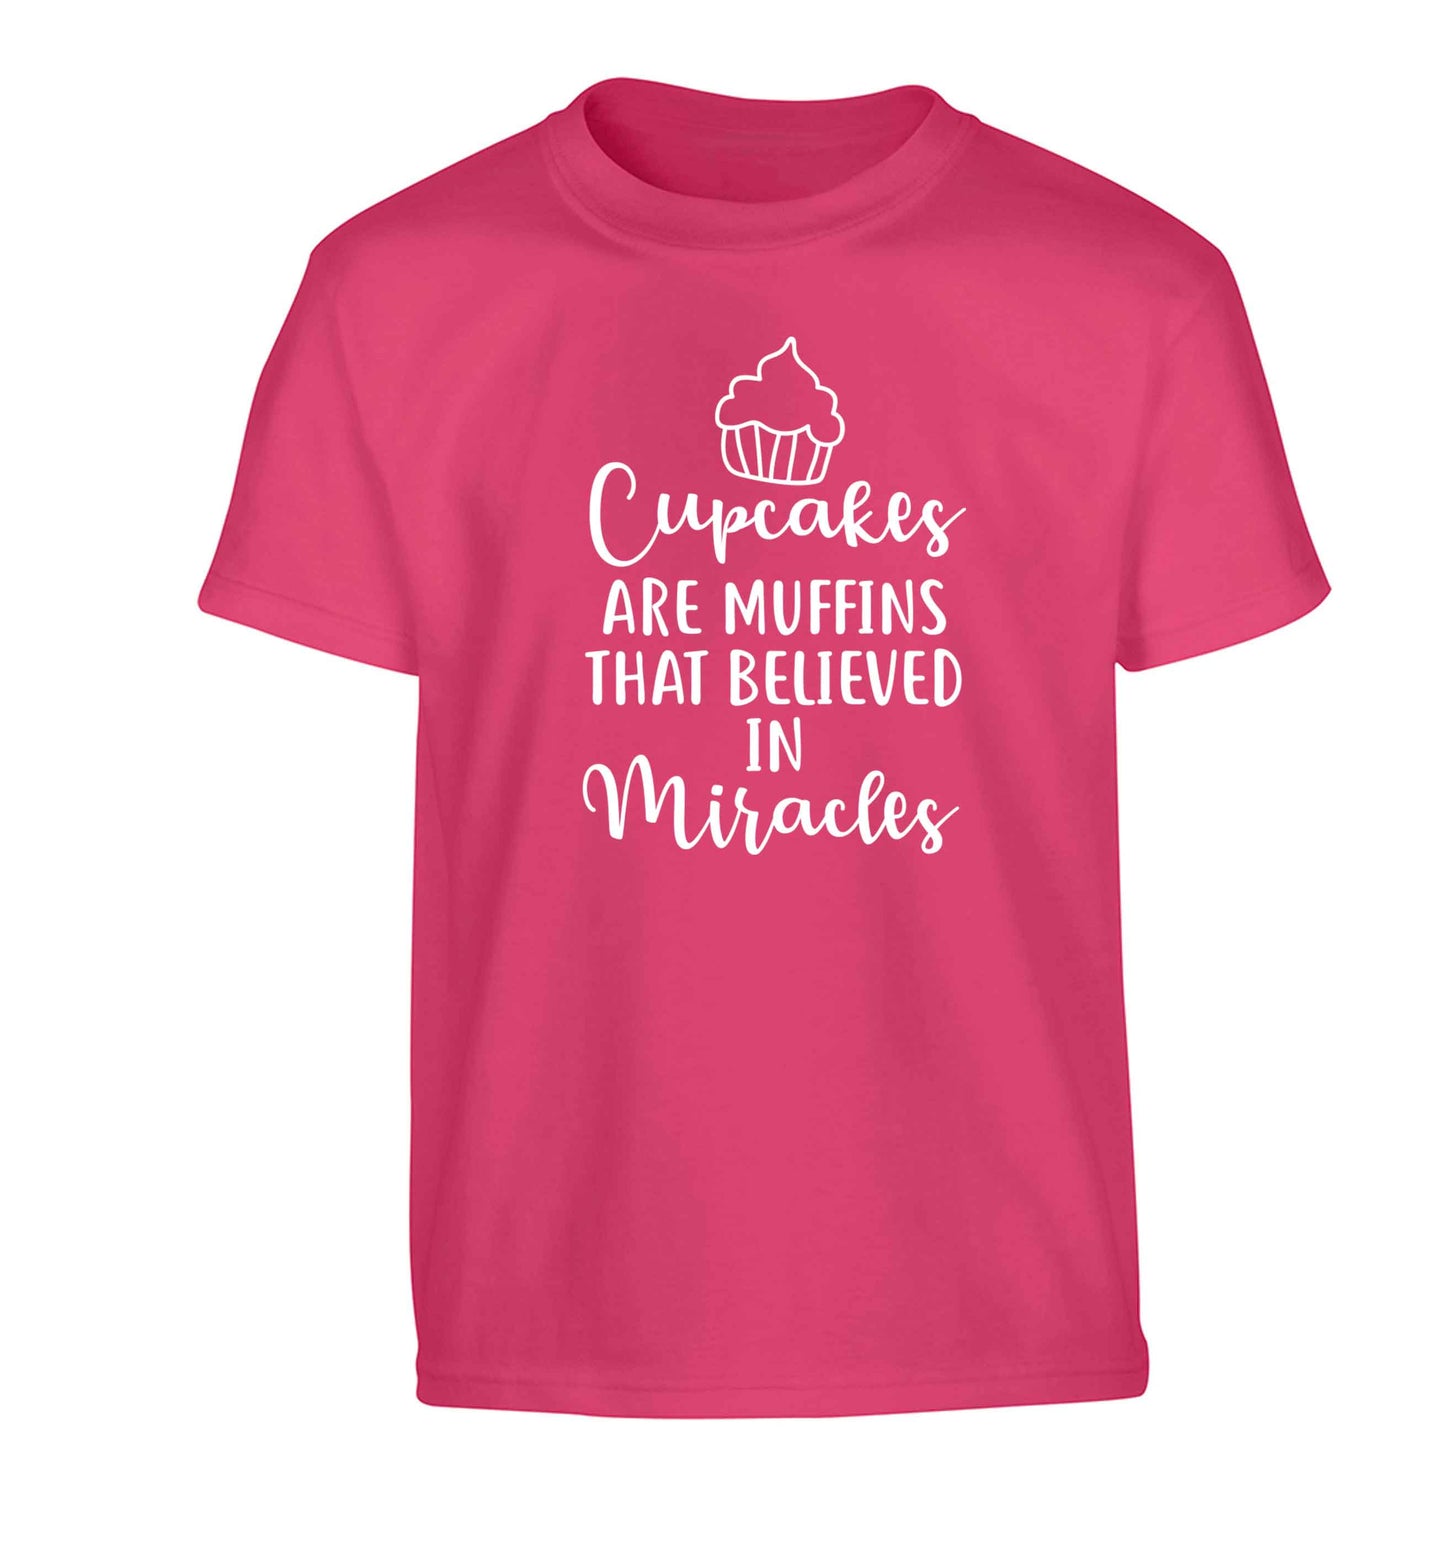 Cupcakes muffins that believed in miracles Children's pink Tshirt 12-13 Years